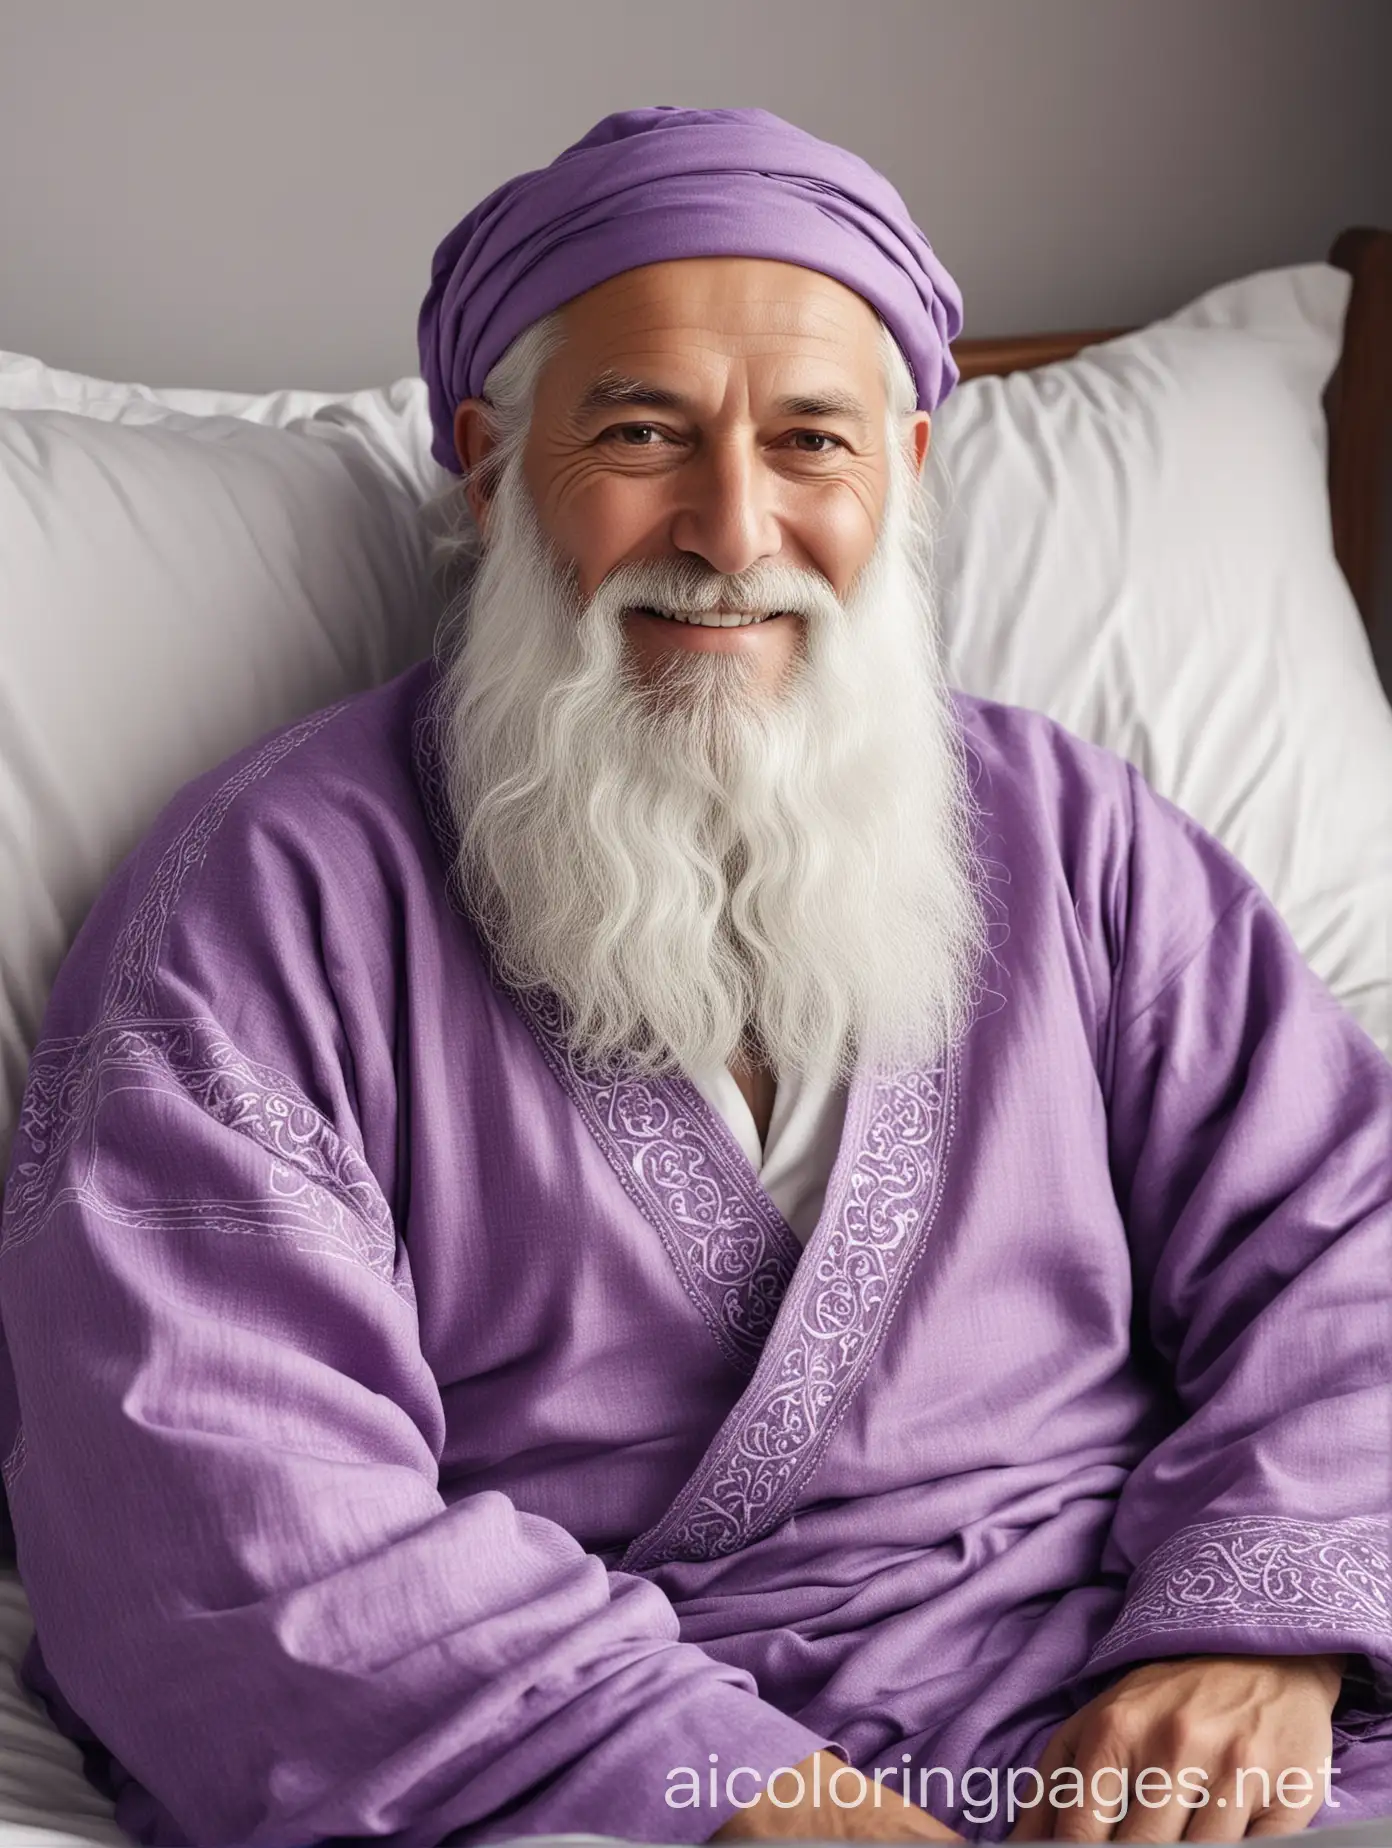 A wise middle-aged man from the Islamic era, with white skin and a long and thick white beard, staring at the lens, smiling faintly, sitting in a sleeping bed, wearing beautiful purple clothes, very realistic, 4K, vintage, so that the whole body is visible, Coloring Page, black and white, line art, white background, Simplicity, Ample White Space. The background of the coloring page is plain white to make it easy for young children to color within the lines. The outlines of all the subjects are easy to distinguish, making it simple for kids to color without too much difficulty